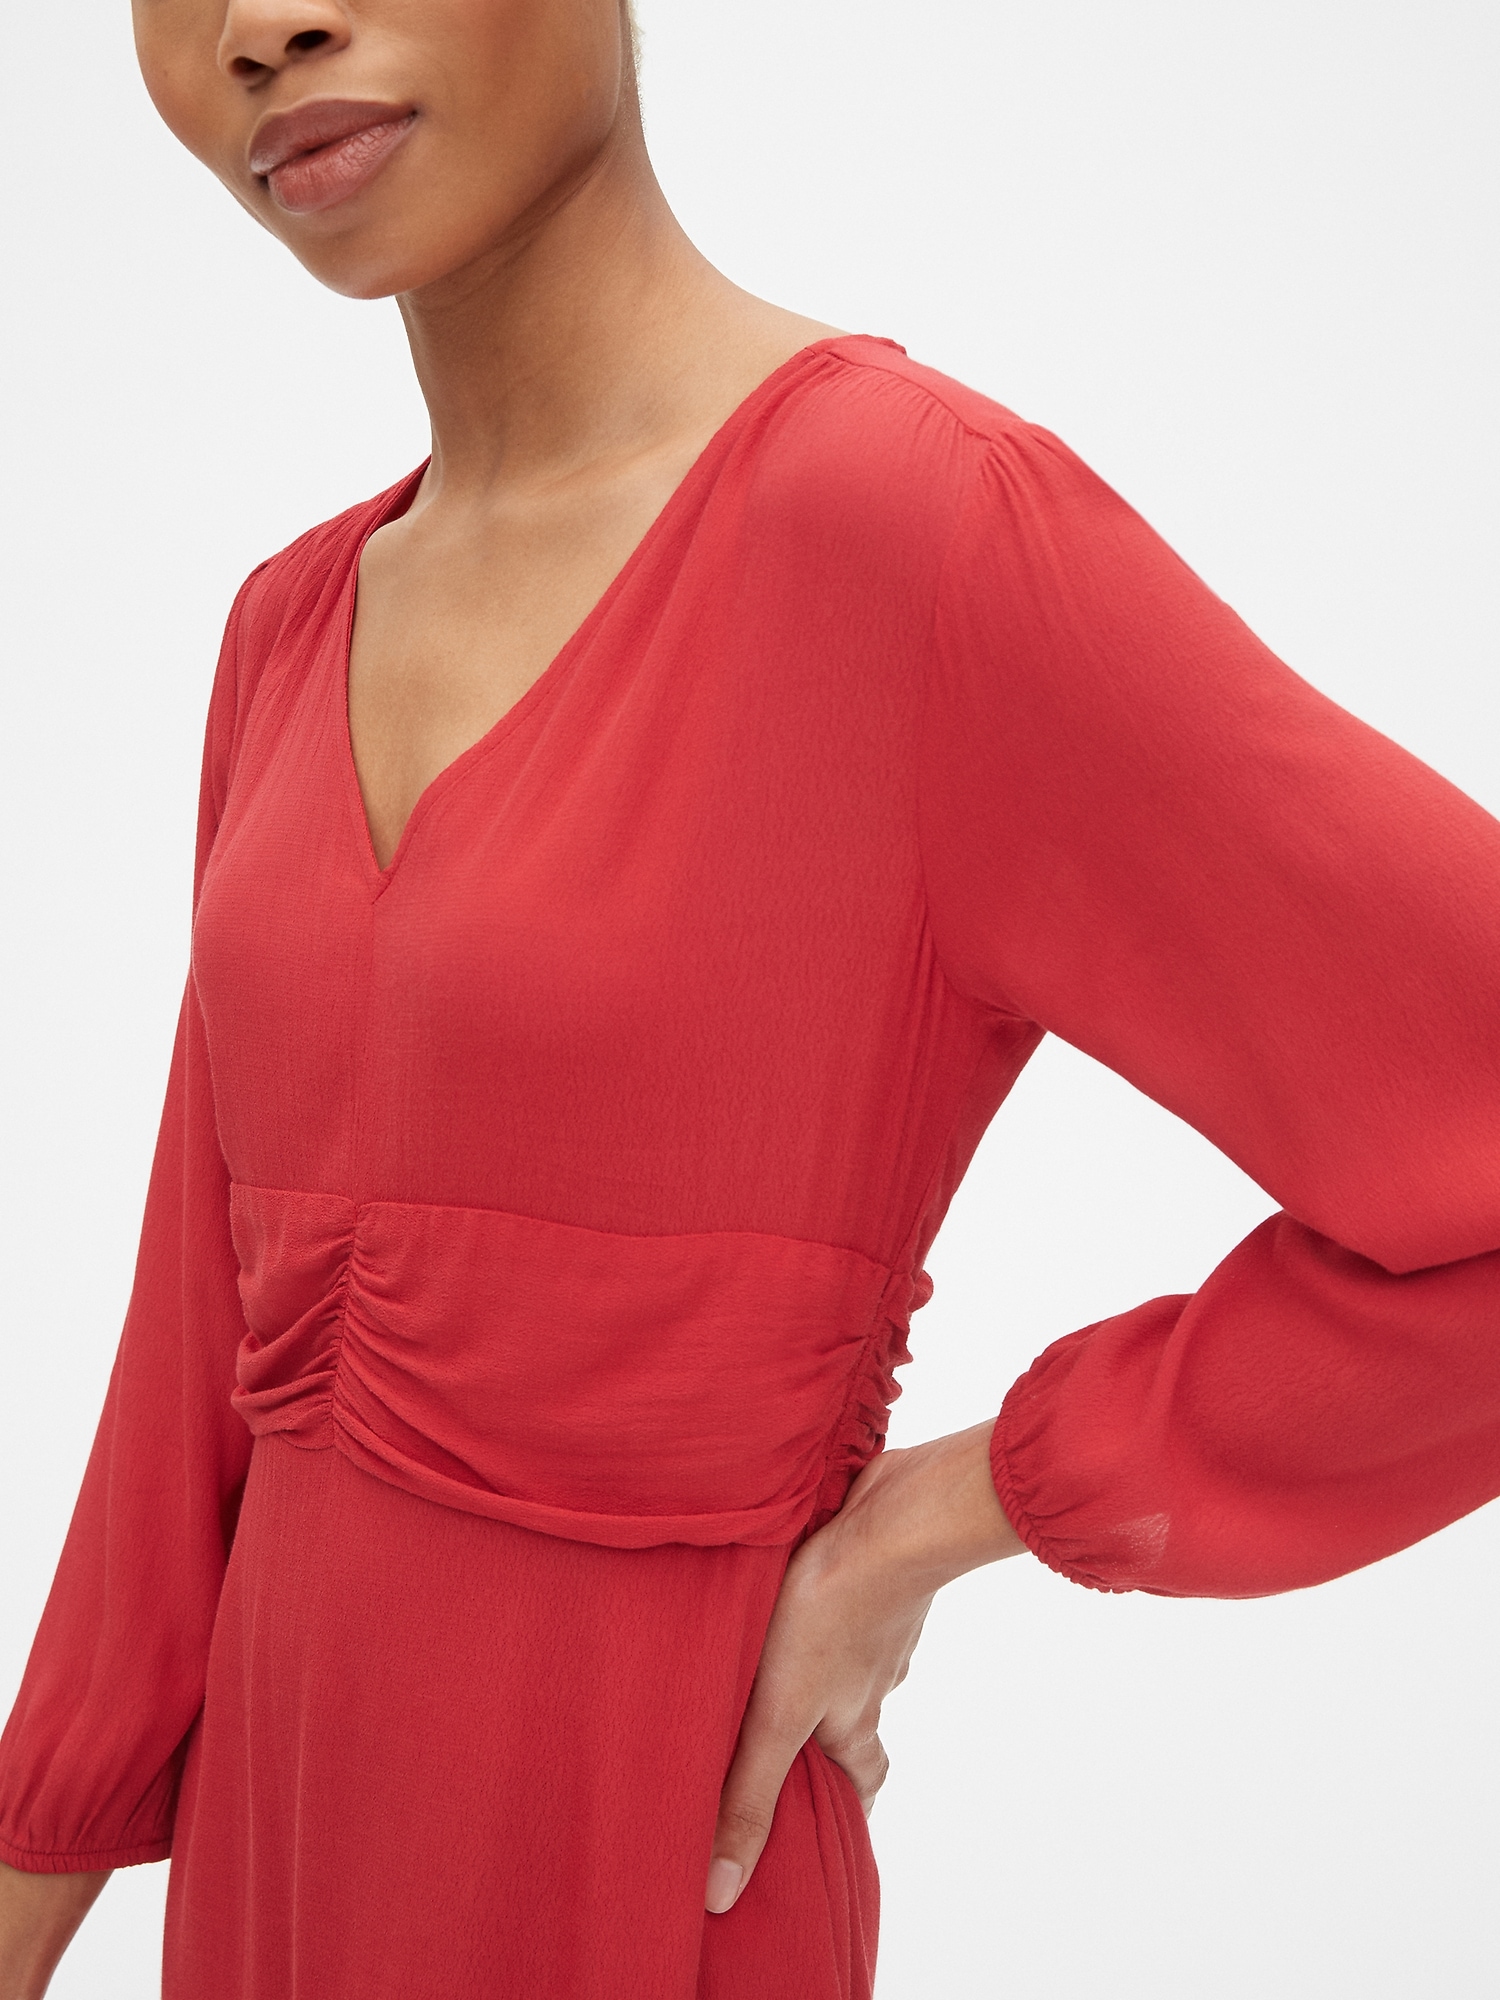 Fit and Flare Long Sleeve Ruched V-Neck Dress